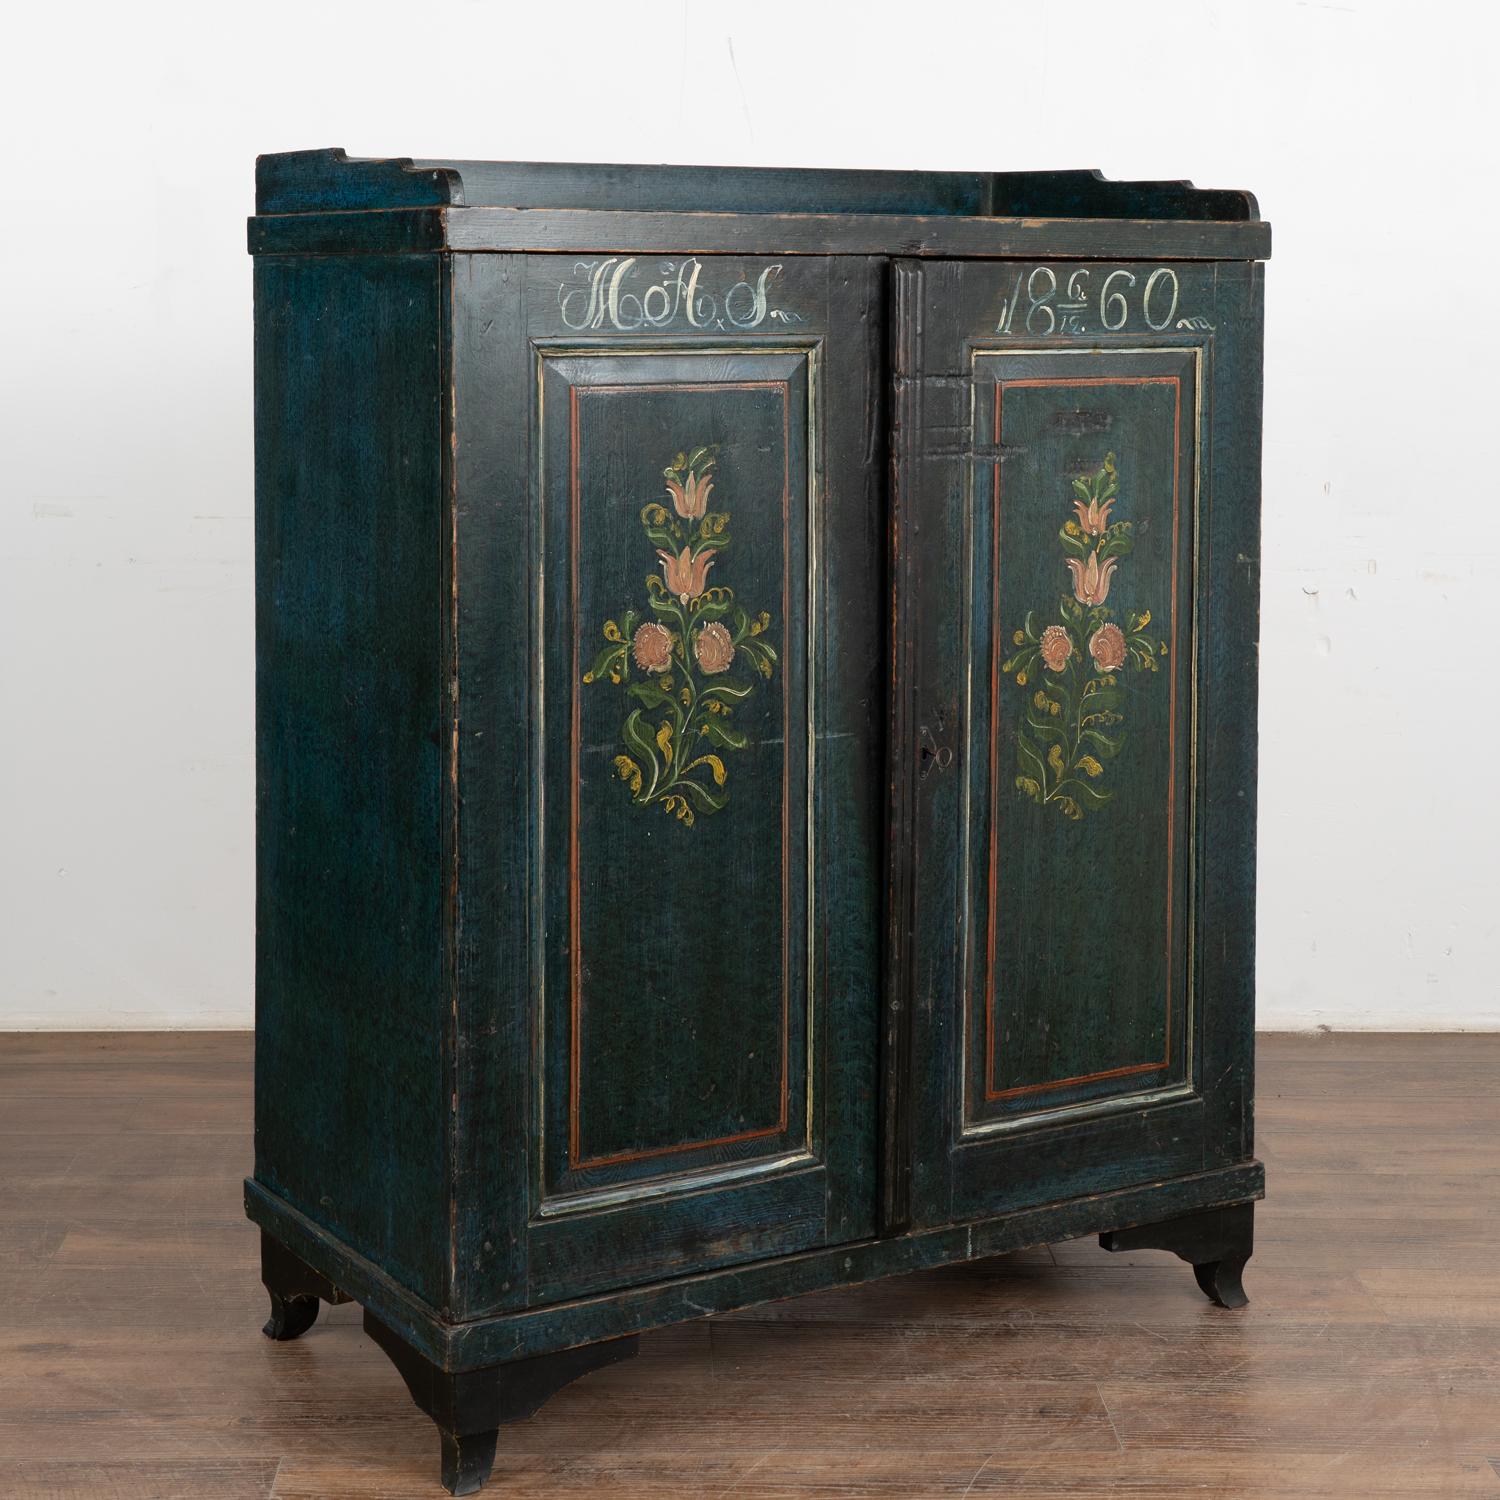 While you can frequently find original painted Swedish trunks, it is difficult to find a cabinet or sideboard with exceptional original folk art paint such as this one.
The two panel doors are painted with a traditional floral motif against a dark